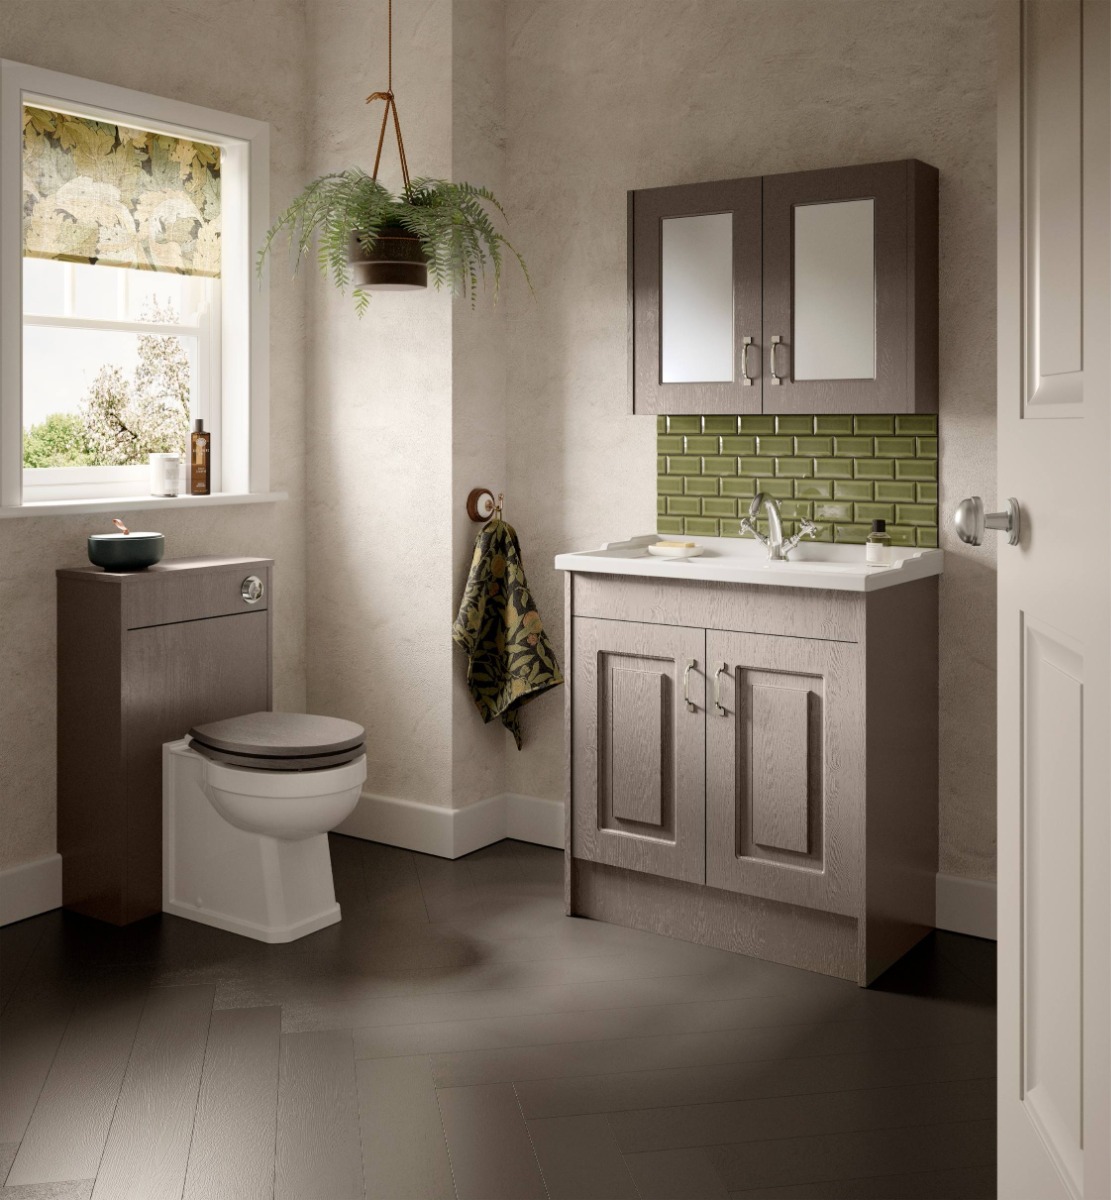 natural looking bathroom with traditional features